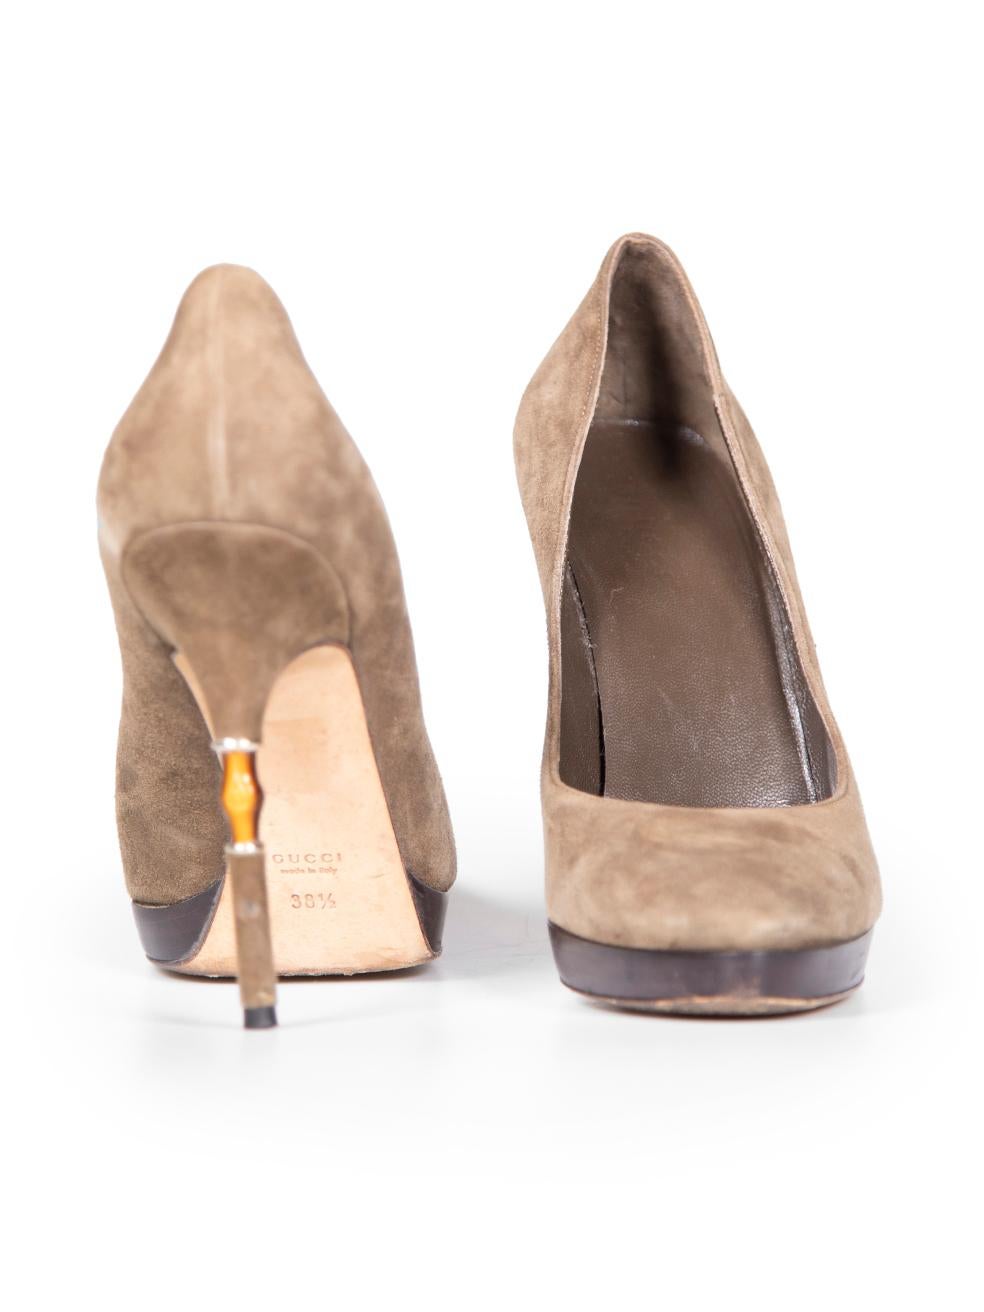 Gucci Brown Suede Bamboo Accent Platform Pumps Size IT 38.5 In Good Condition For Sale In London, GB